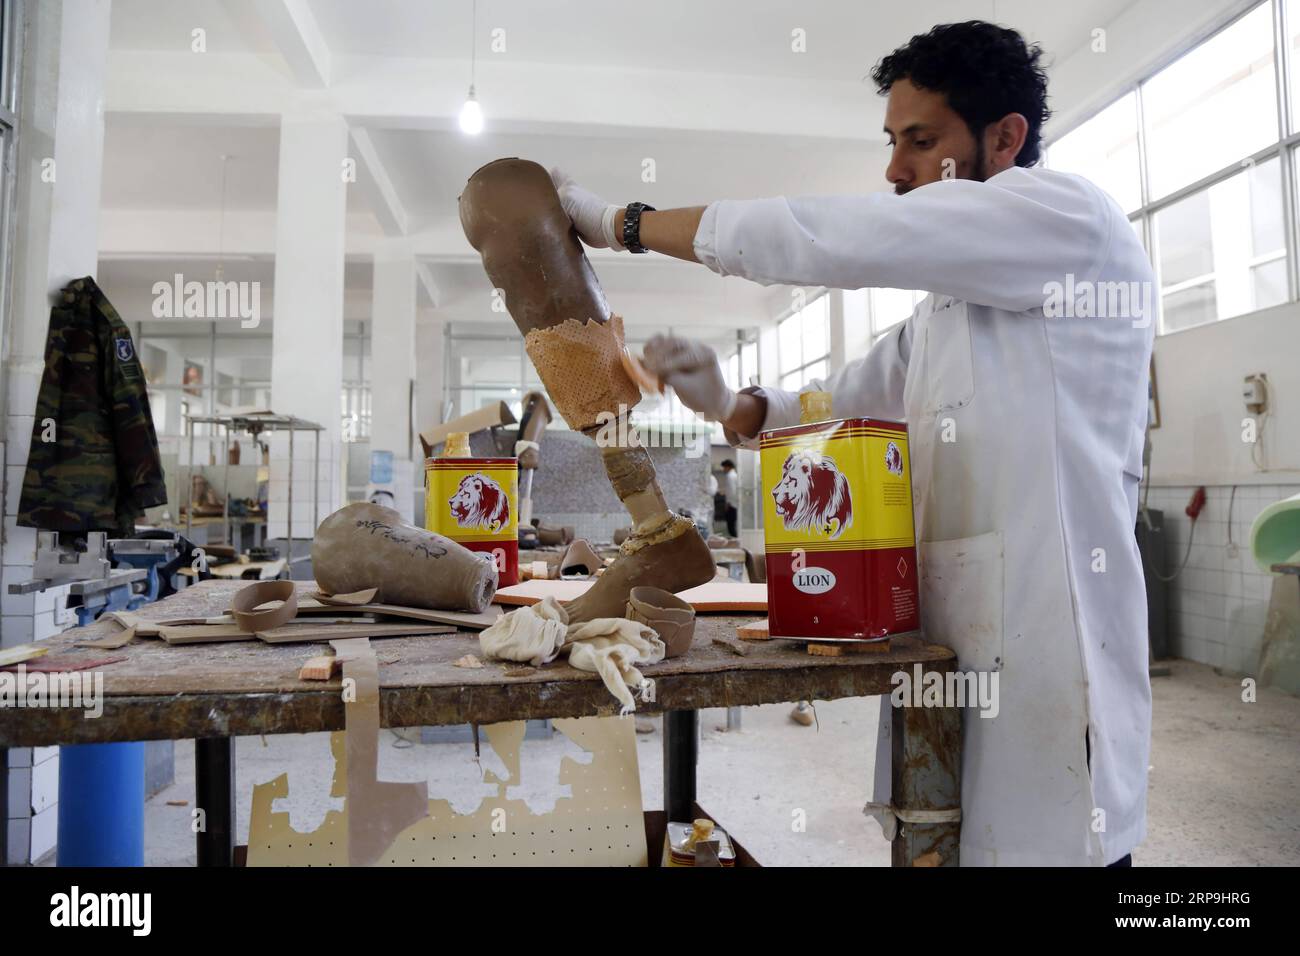 (190407) -- SANAA, April 7, 2019 -- A technician prepares a prosthetic limb at a rehabilitation center in Sanaa, Yemen, on April 7, 2019. Large swathes of Yemen have been swamped by randomly-planted landmines, which are posing a lingering threat to the lives of citizens across the war-torn country. According to the United Nations, thousands of landmines, unexploded ordnance and other explosive war remnants have been left behind during the ongoing conflict in Yemen which has just entered its fifth year. ) YEMEN-SANAA-LANDMINES-VICTIMS MohammedxMohammed PUBLICATIONxNOTxINxCHN Stock Photo